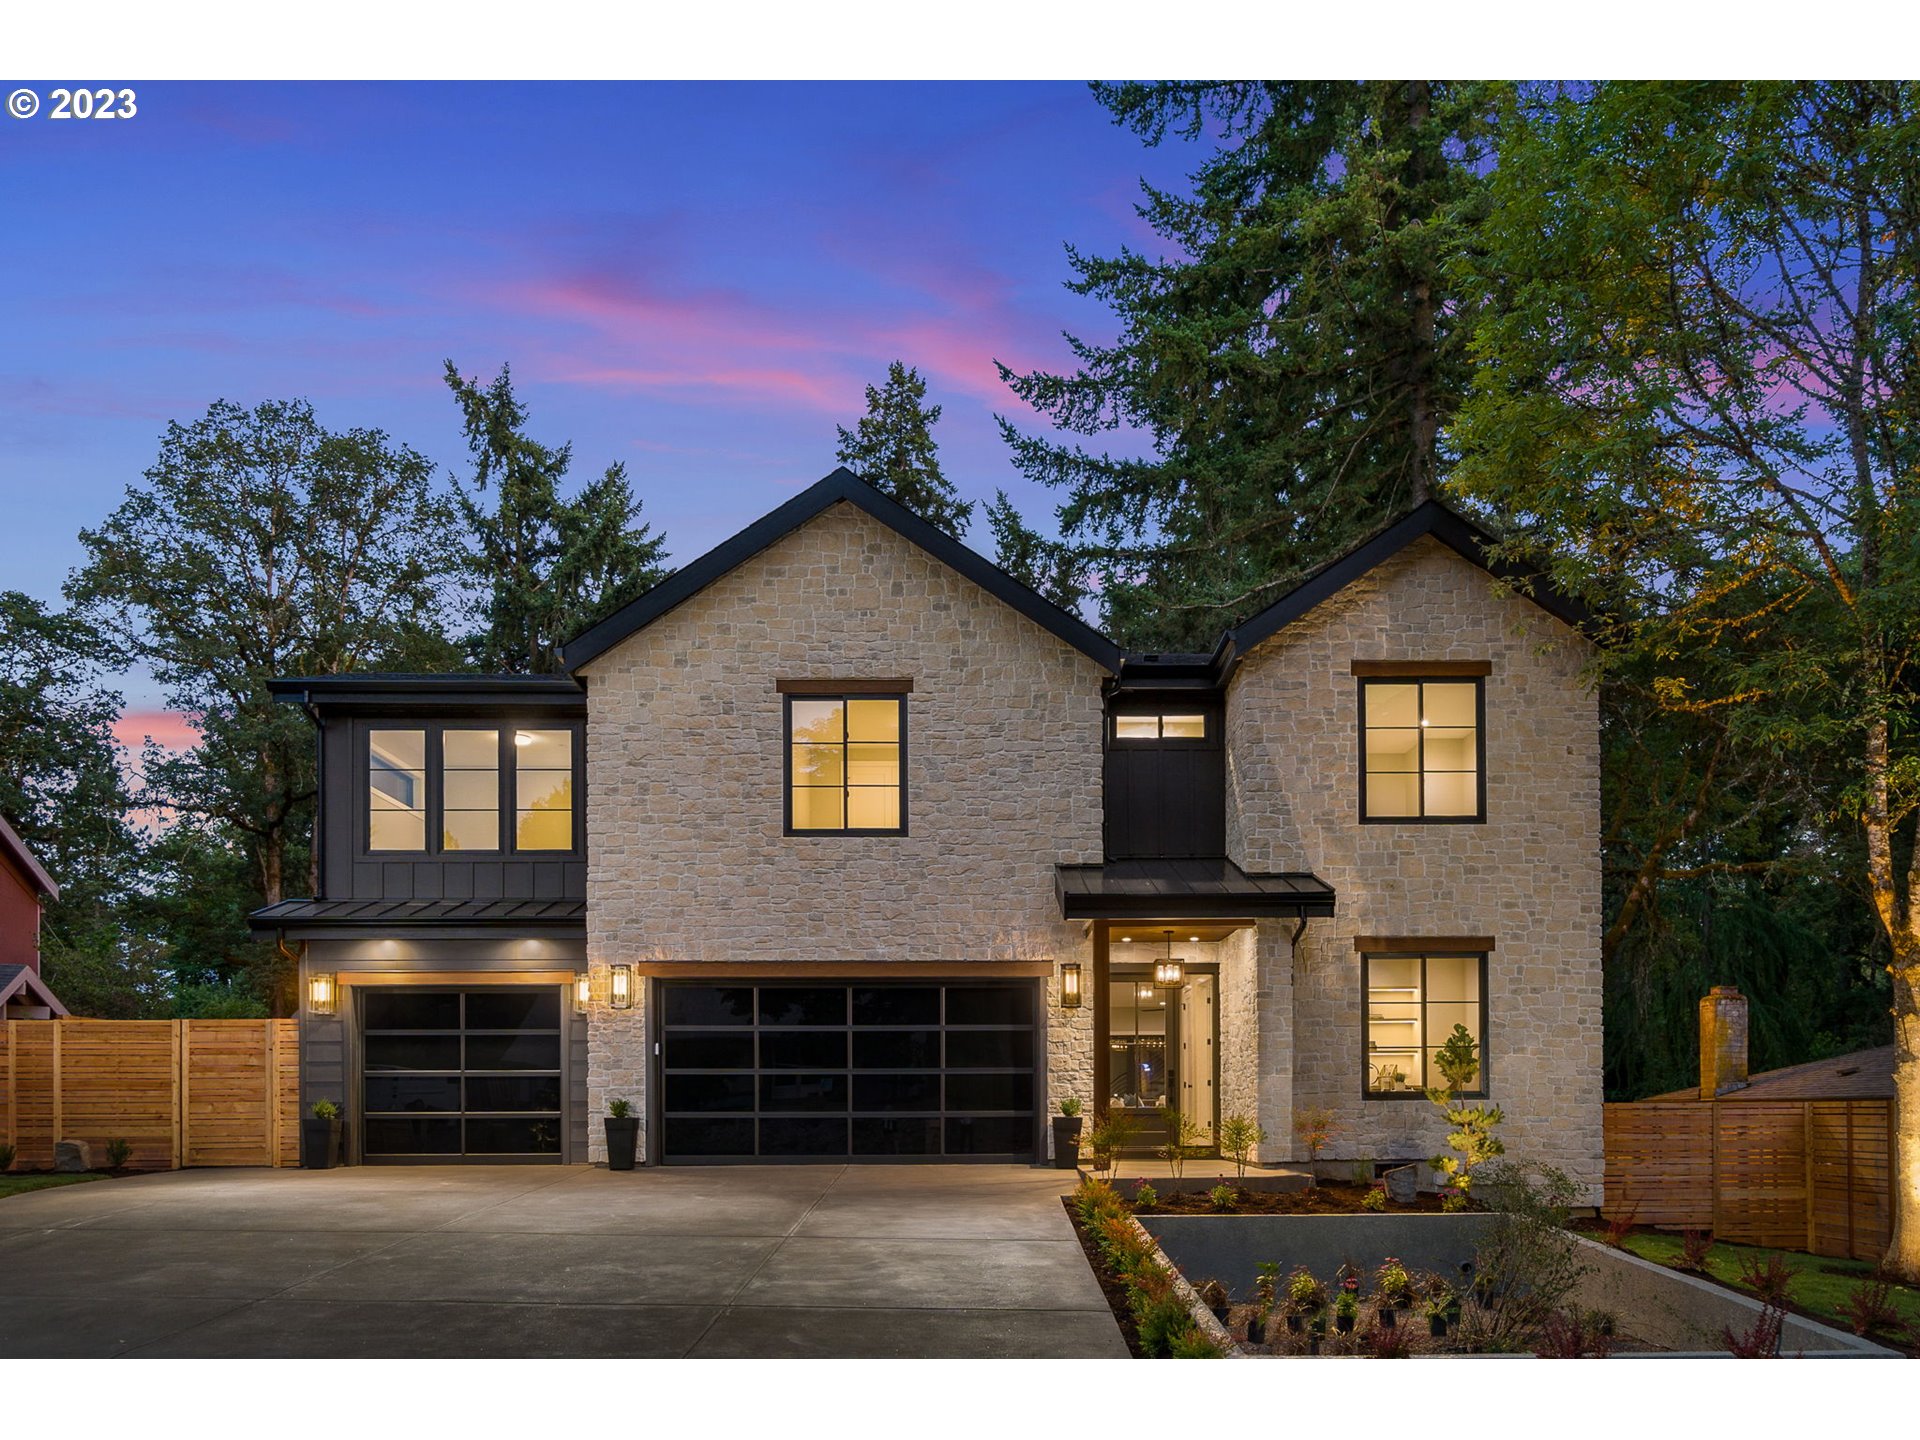 Luxury home builder New Look Development welcomes you to 4200 Old Gate Road located in the heart of Lake Oswego Oregon. This innovative floor plan was created to take full advantage of the homesite and offer a high degree of livability for today's modern lifestyle. The open concept main floor features a great room with a collapsable 16' x 8' panoramic door system inviting the outside in. A gourmet kitchen is equipped with high end stainless steel Dacor appliances. Custom cabinetry continues into the oversized walk-in pantry and dining area. Upstairs the primary suite features a fireplace and large picture windows accompanied by a spa-like bathroom, accented with heated tile flooring that extends into the steam shower, dual sinks and an oversized freestanding tub. A custom walk-in closet finishes off this upscale retreat. This home includes a junior suite on the main level with a closet and upscale bathroom complete with heated tile flooring, walk-in shower and quartz countertops. A private outdoor living and entertainment area include a gas fireplace, built-in gas BBQ, refrigerator and electric heating system for year-round use. This home is not to be missed and won't last long!